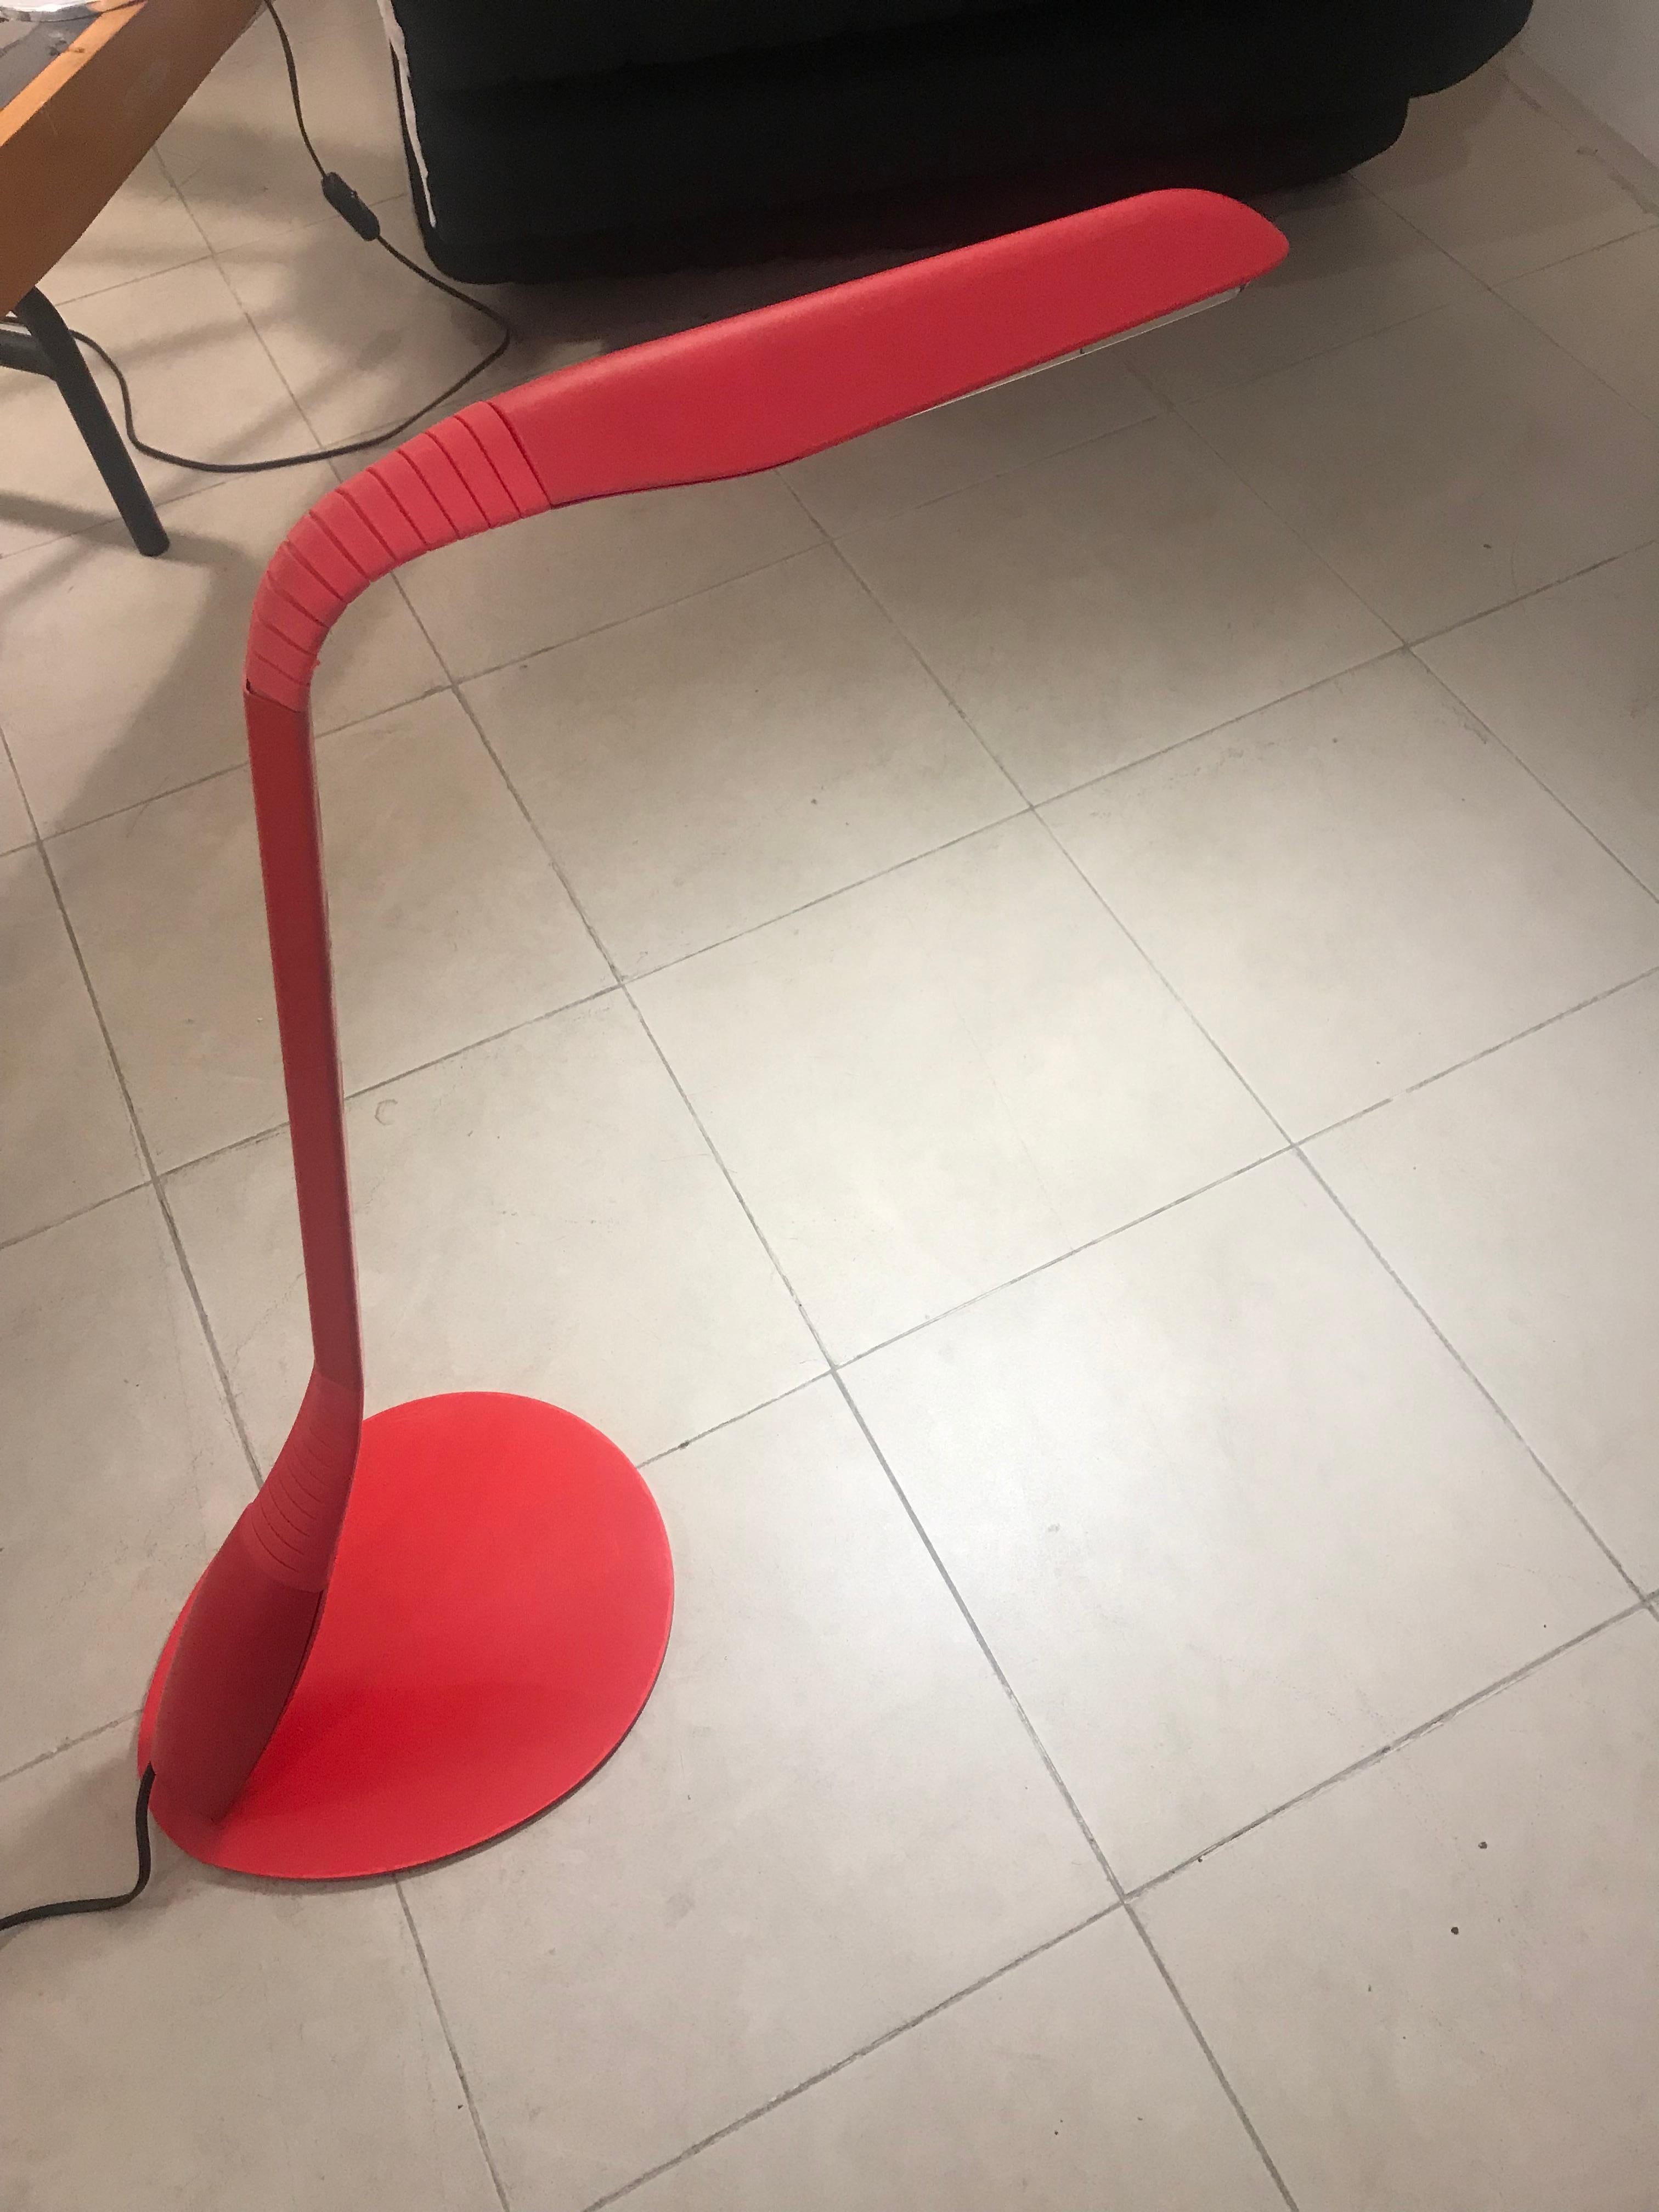 Beautiful Cobra lamp
Drawn by Philippe Michel for Manade
circa 1980
Made in France
Articulated arm in 2 places
Red
H 65 cms / l 24 / p 24
290 euros.